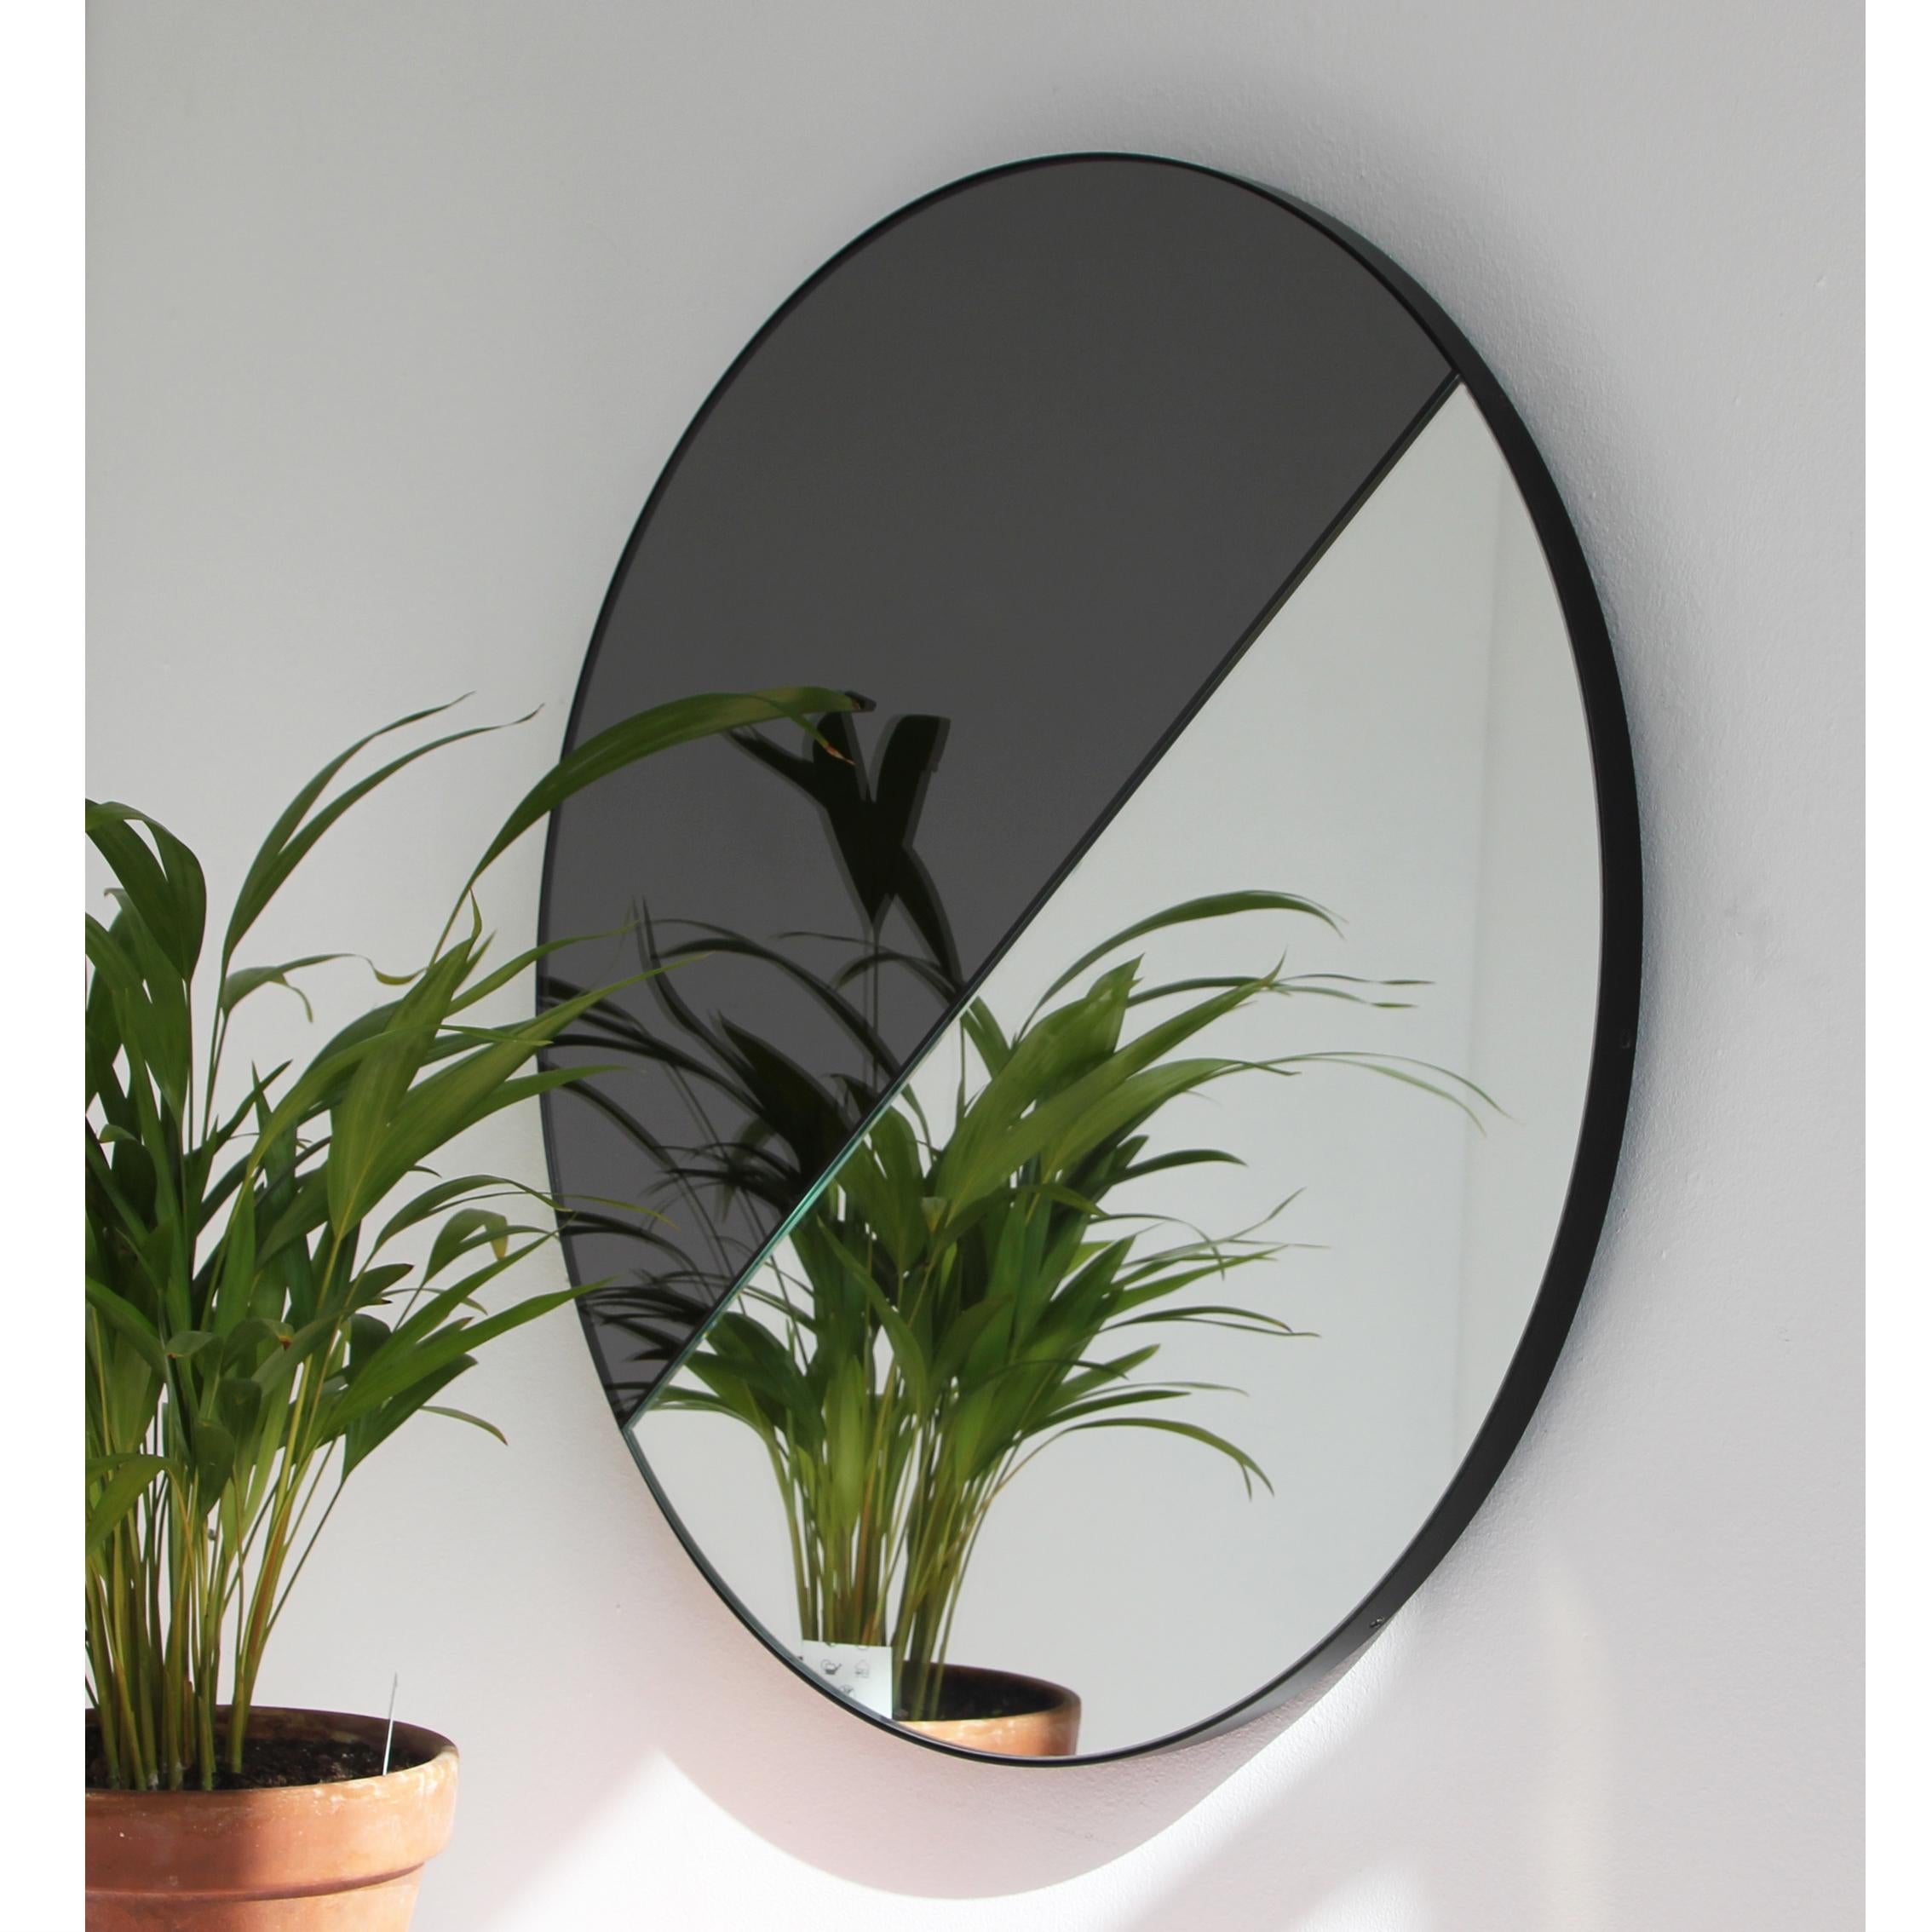 Powder-Coated Orbis Dualis Mixed Tinted Silver Black Round Mirror with Black Frame, Regular For Sale